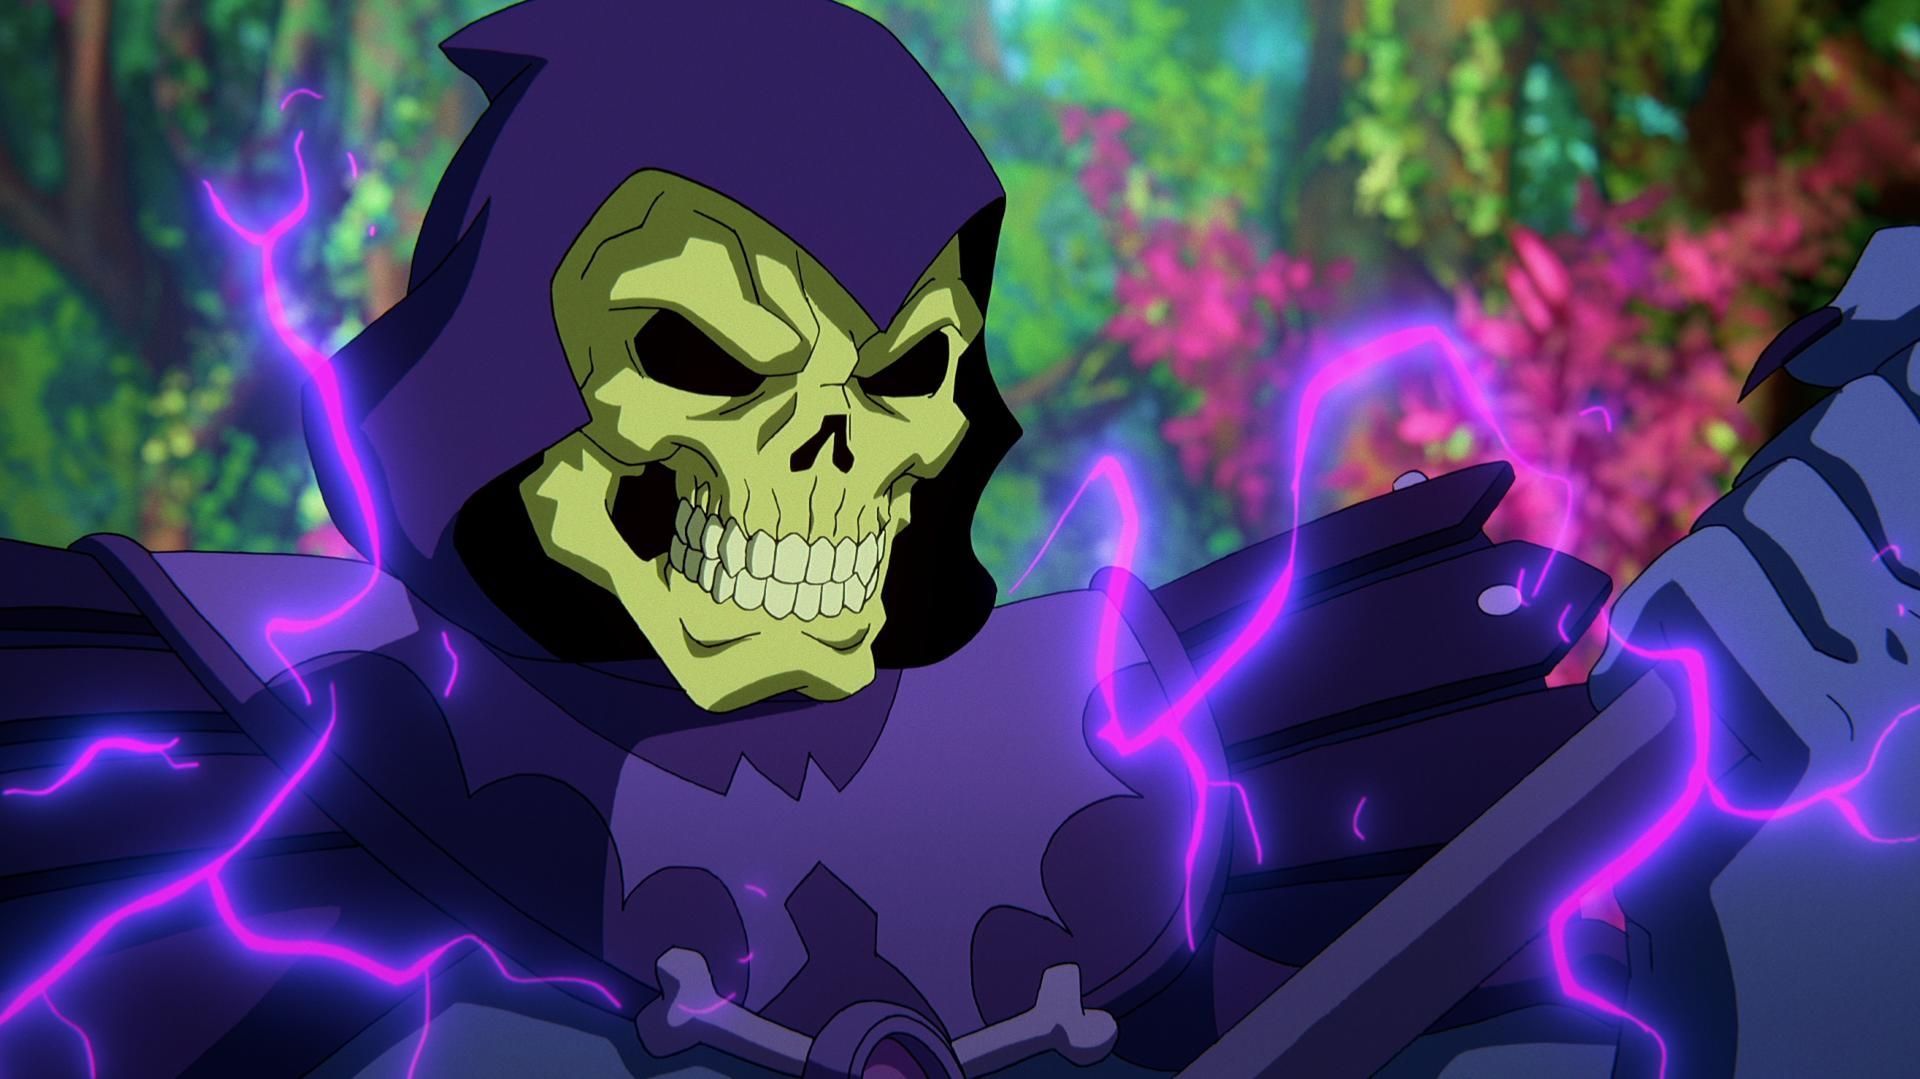 In a CG animated still from Masters of the Universe: Revelation, Skeletor, who wears a purple cloak and hood over his skull, stands in a forest with bright foliage as he grips his spear as purple electricity sparks around him.